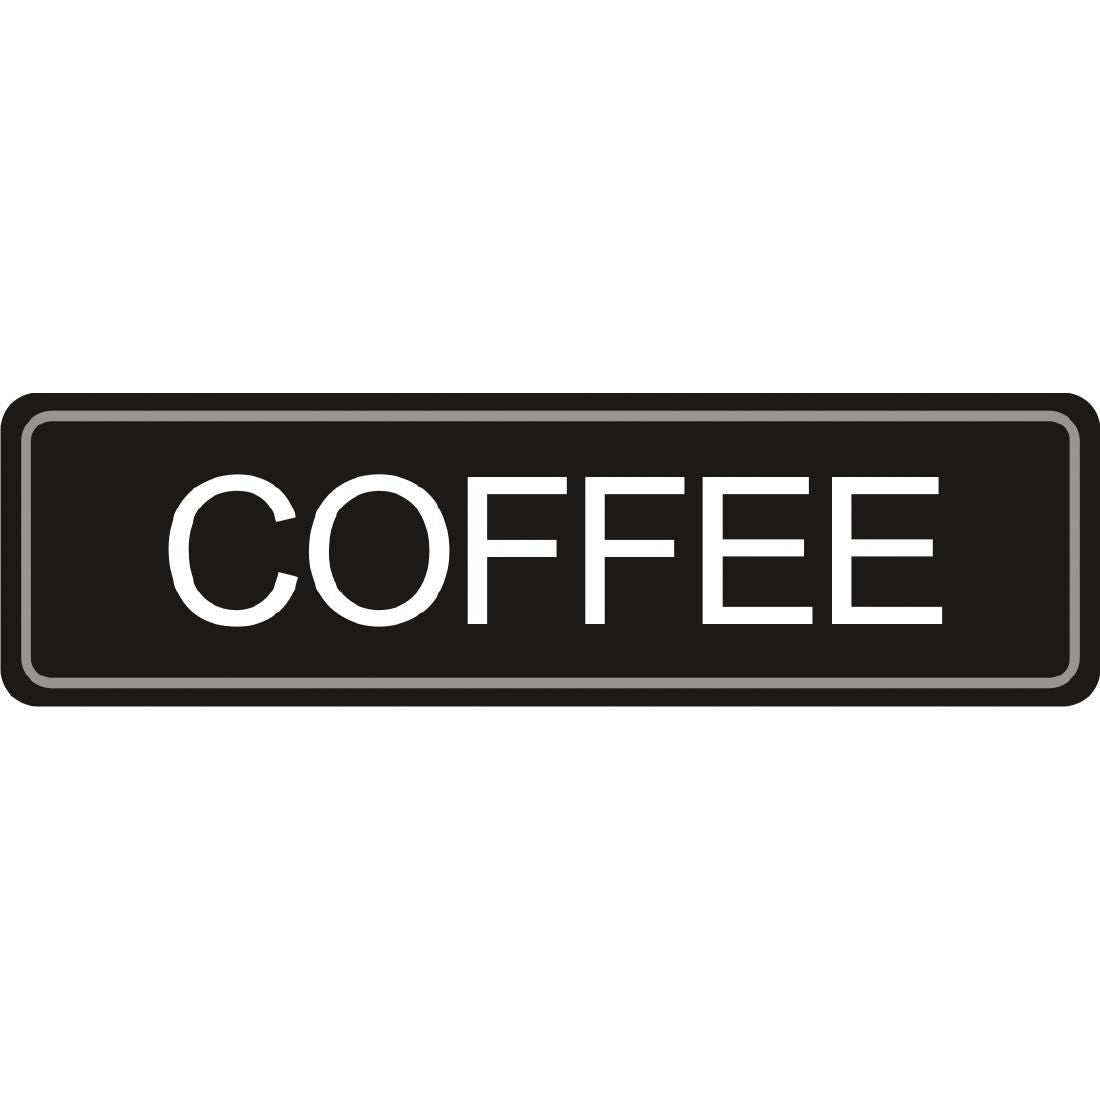 Adhesive Airpot Label - Coffee JD Catering Equipment Solutions Ltd